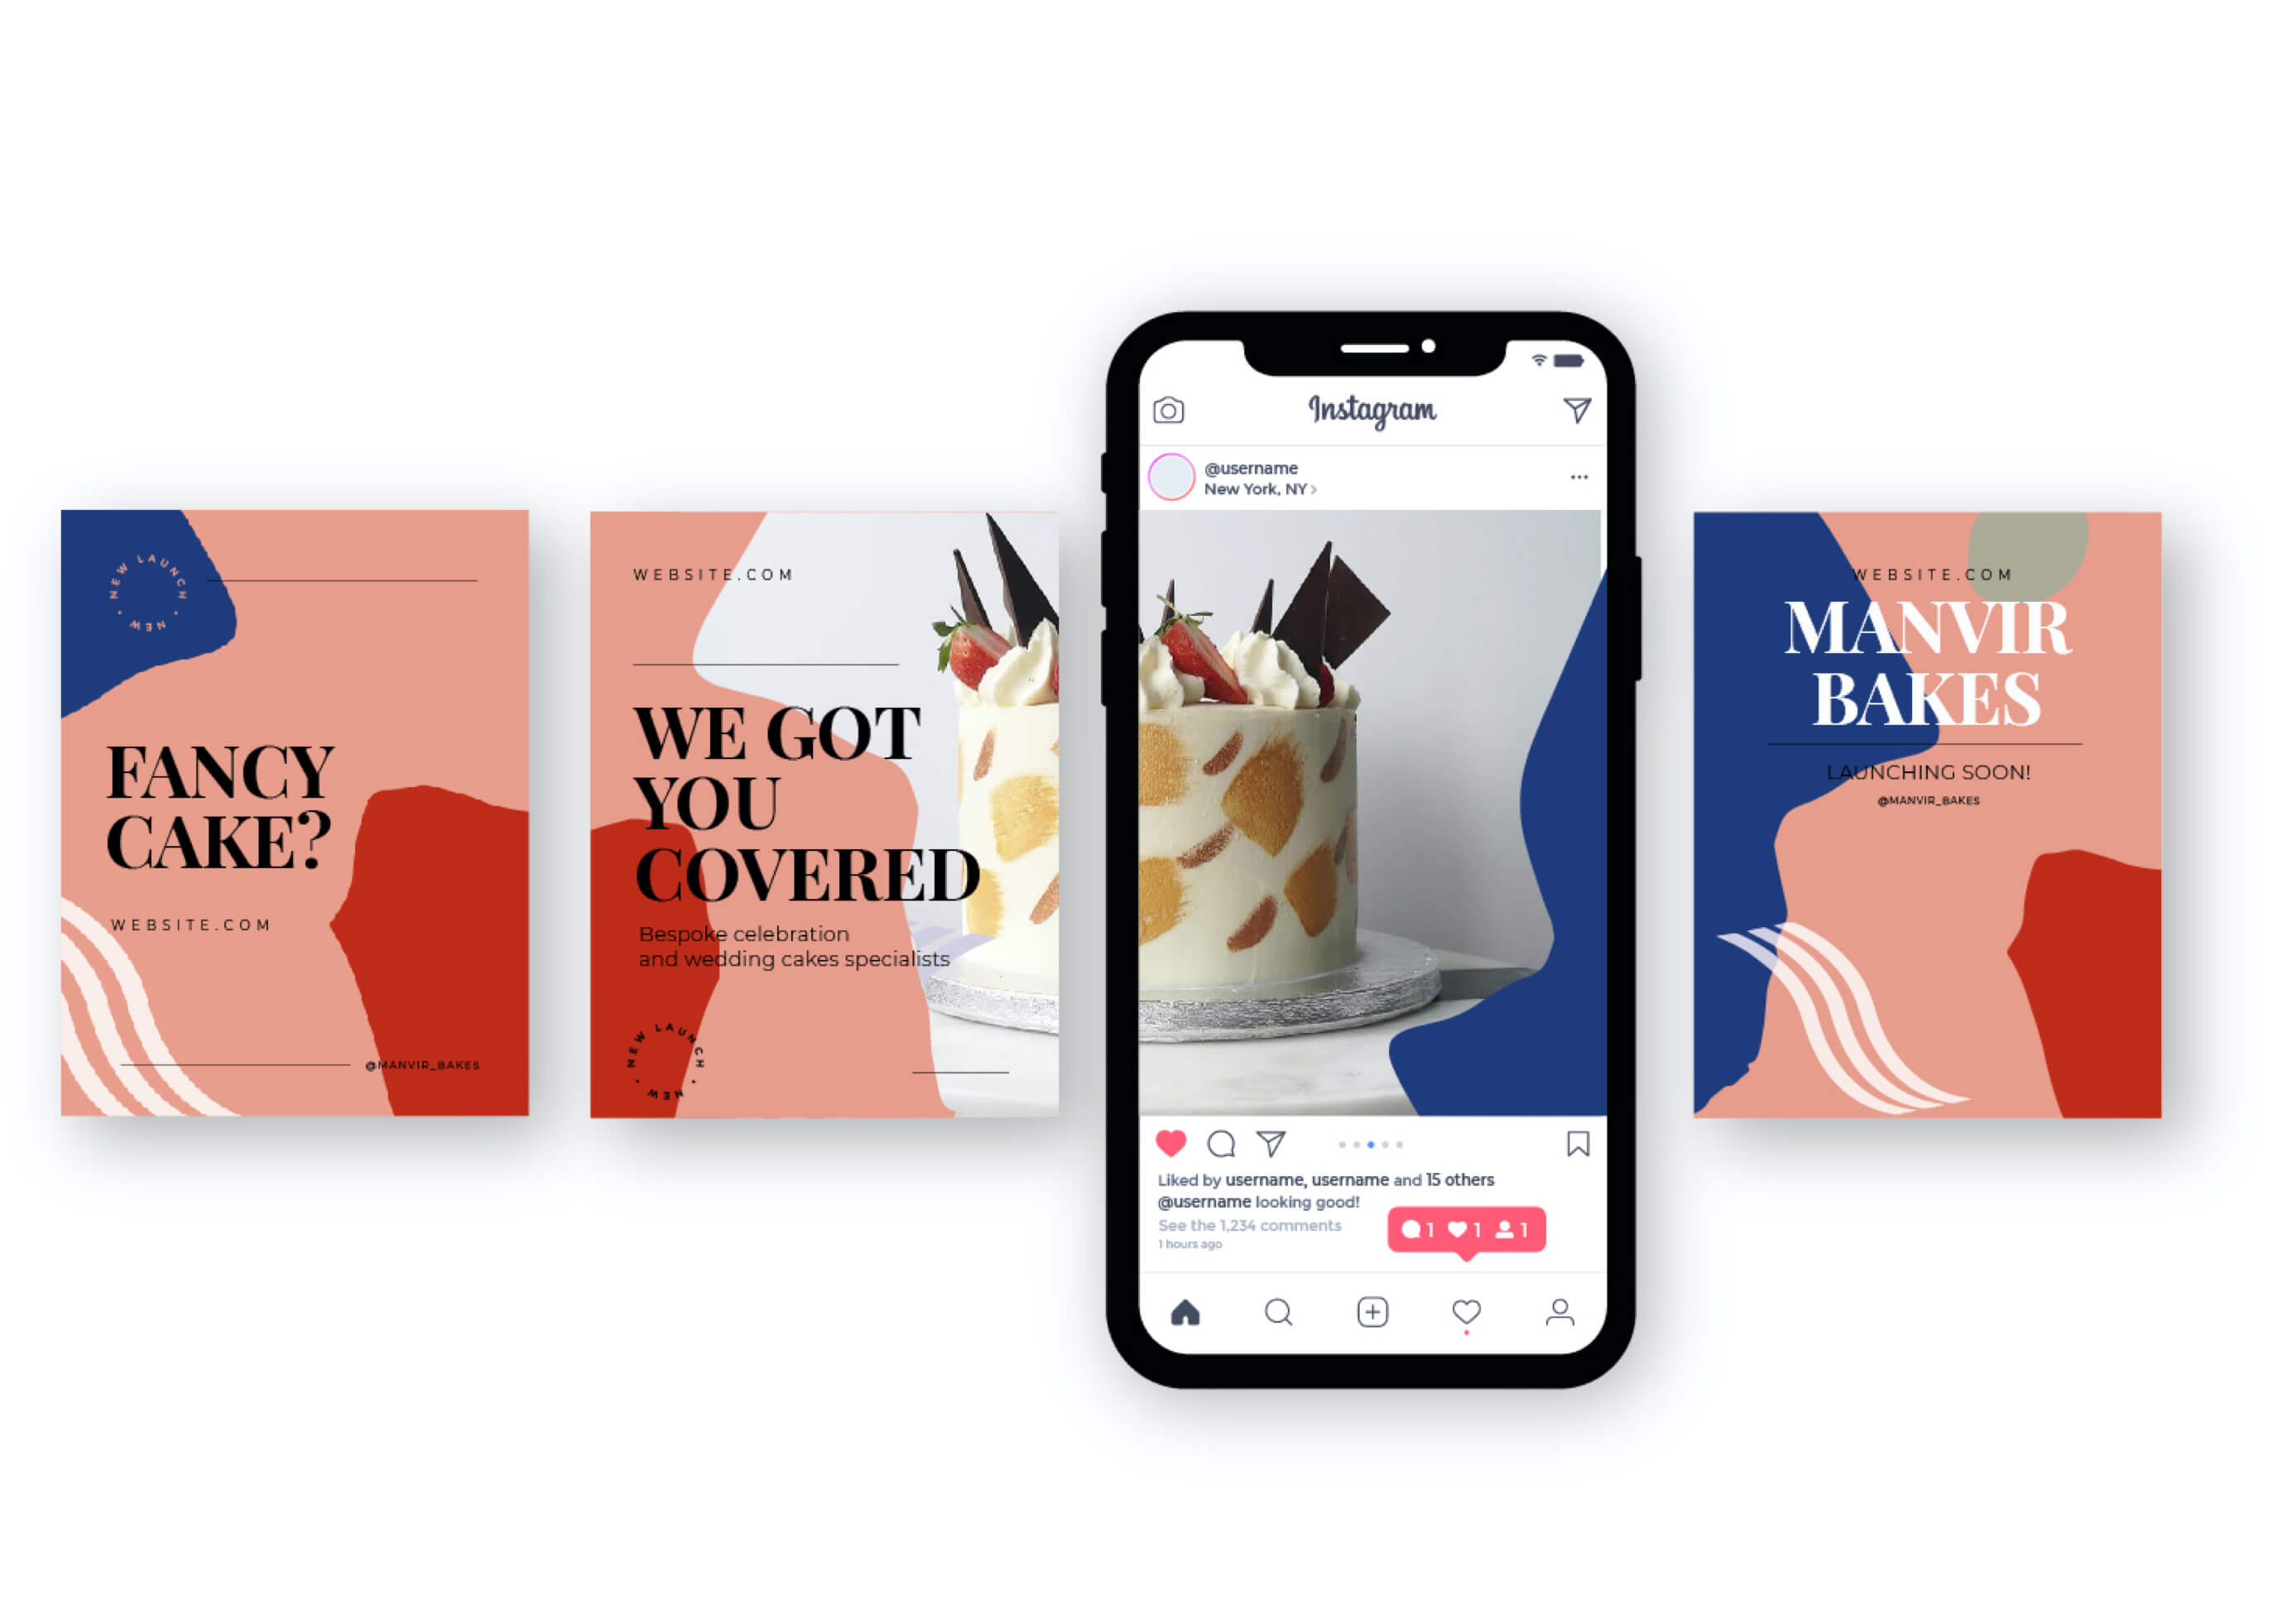 Instagram carousel screens concept for branded launch of Manvir Bakes